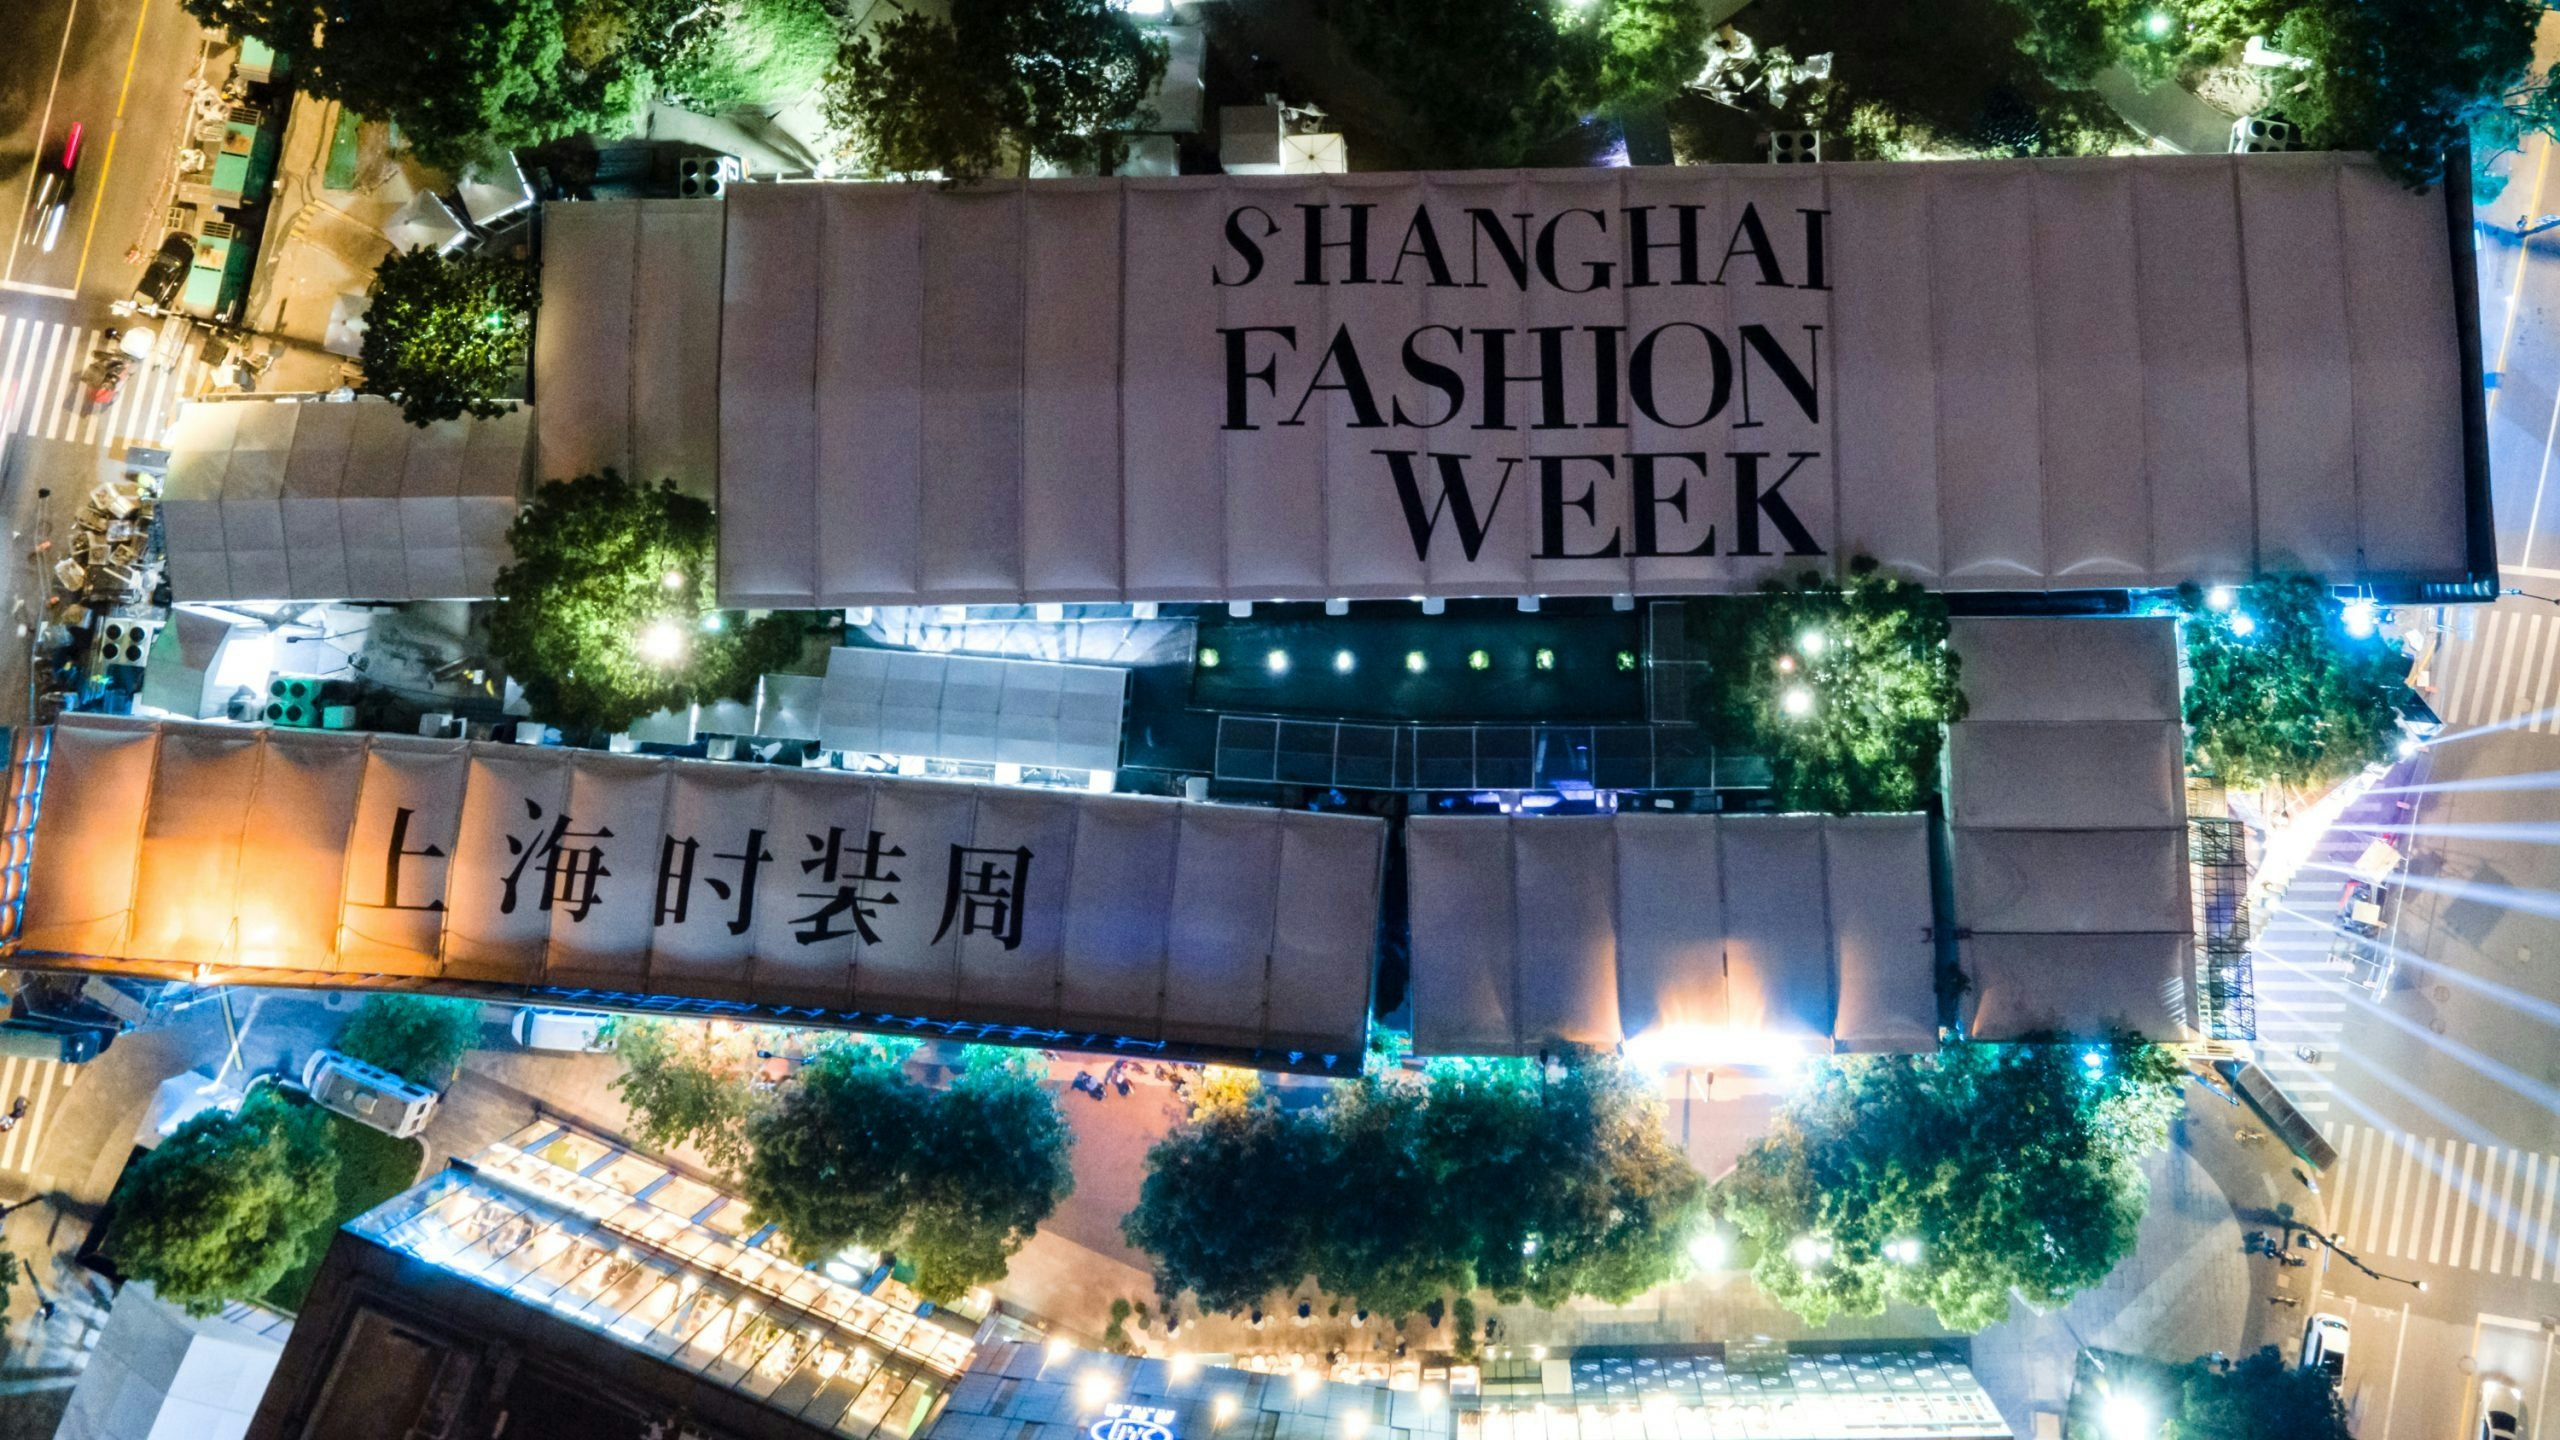 Shanghai Fashion Week returns as a physical extravaganza with ramped-up B2C events, such as a livestream featuring Viya and lipstick king Li Jiaqi. Photo: Courtesy of SHFW